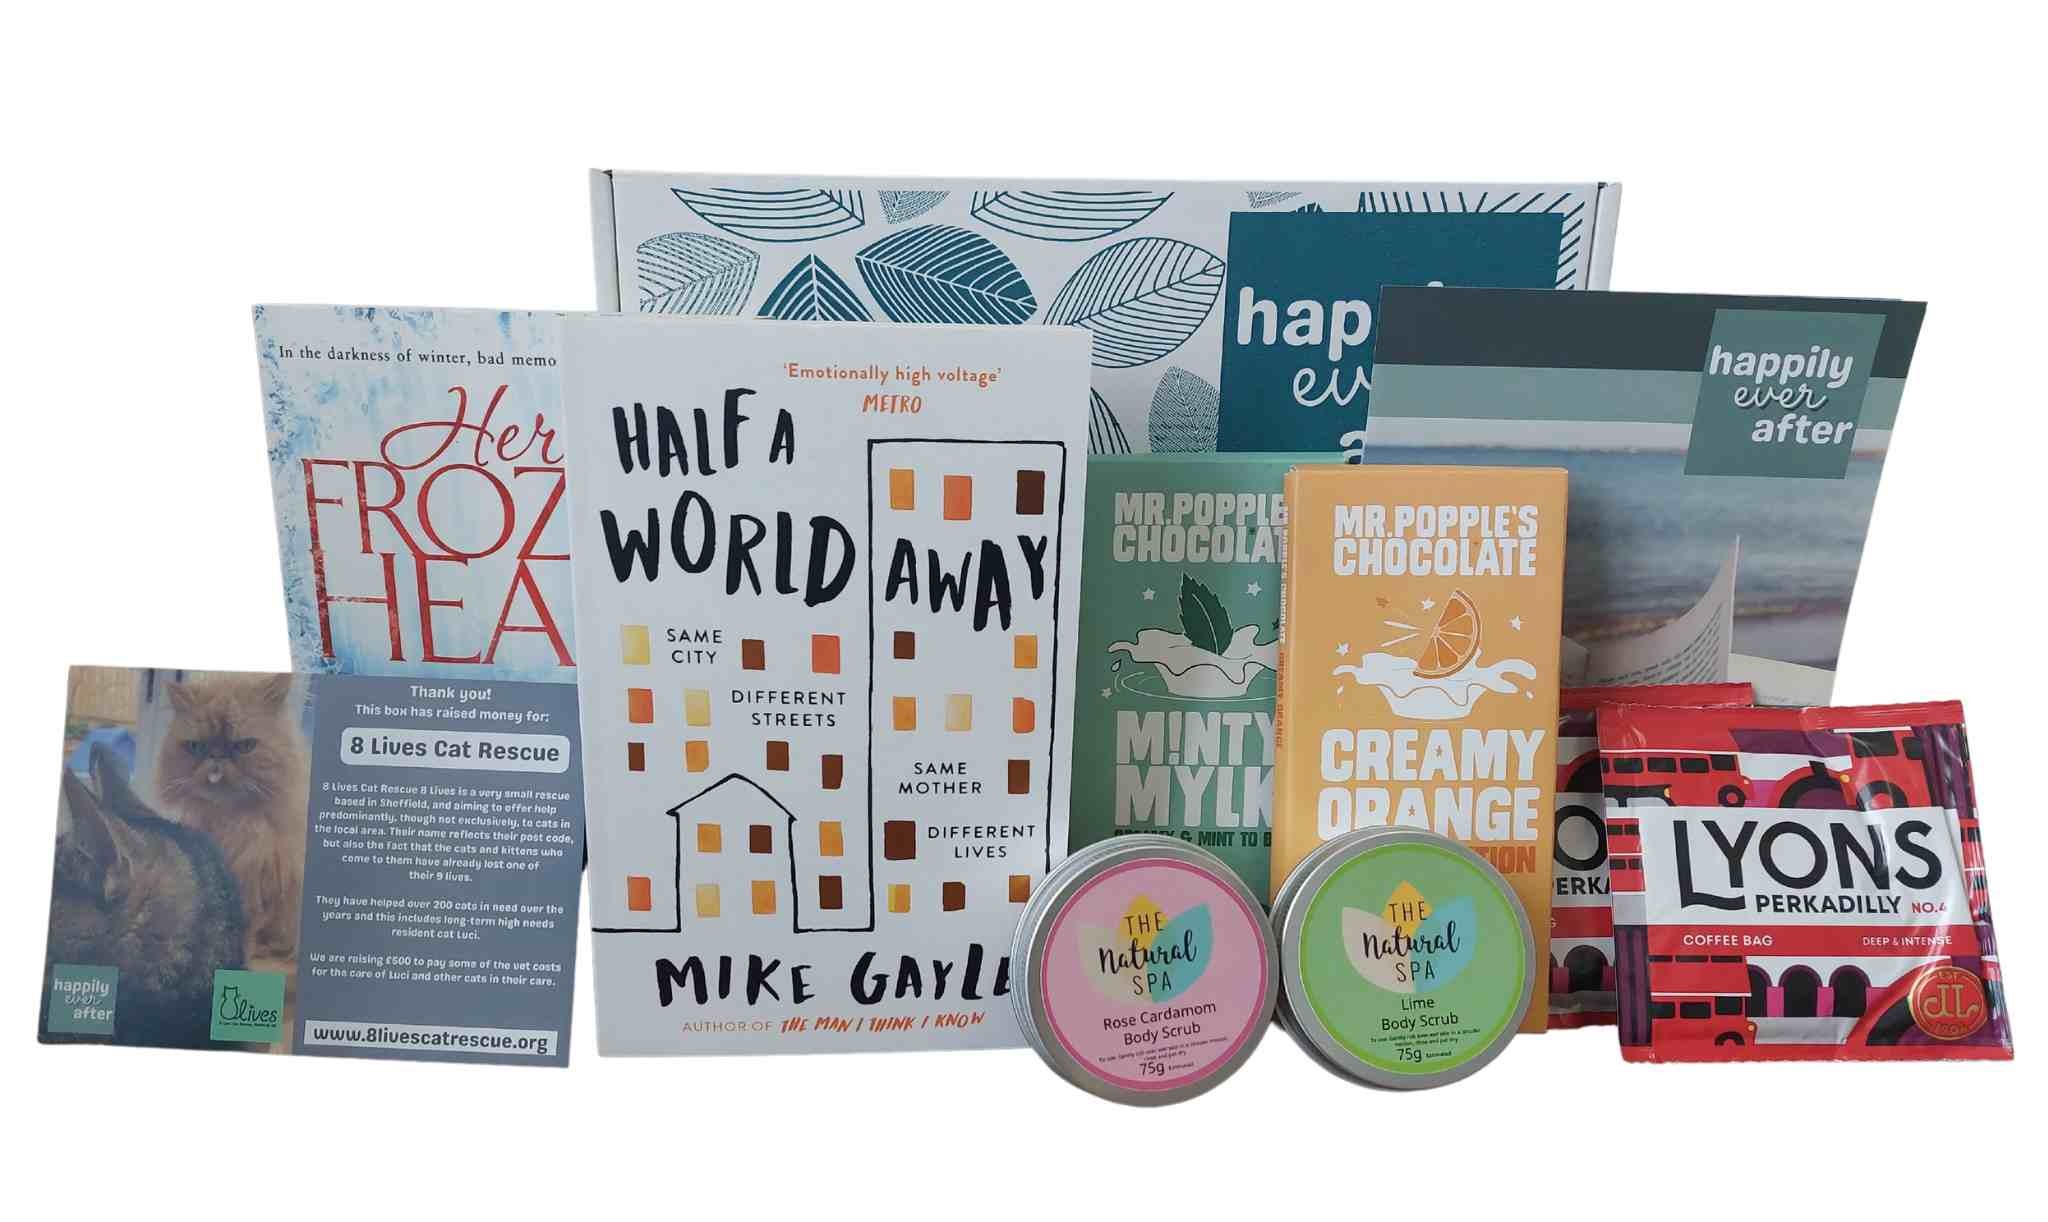 Book and treat box for bookworms. Unique gift idea for vegans.